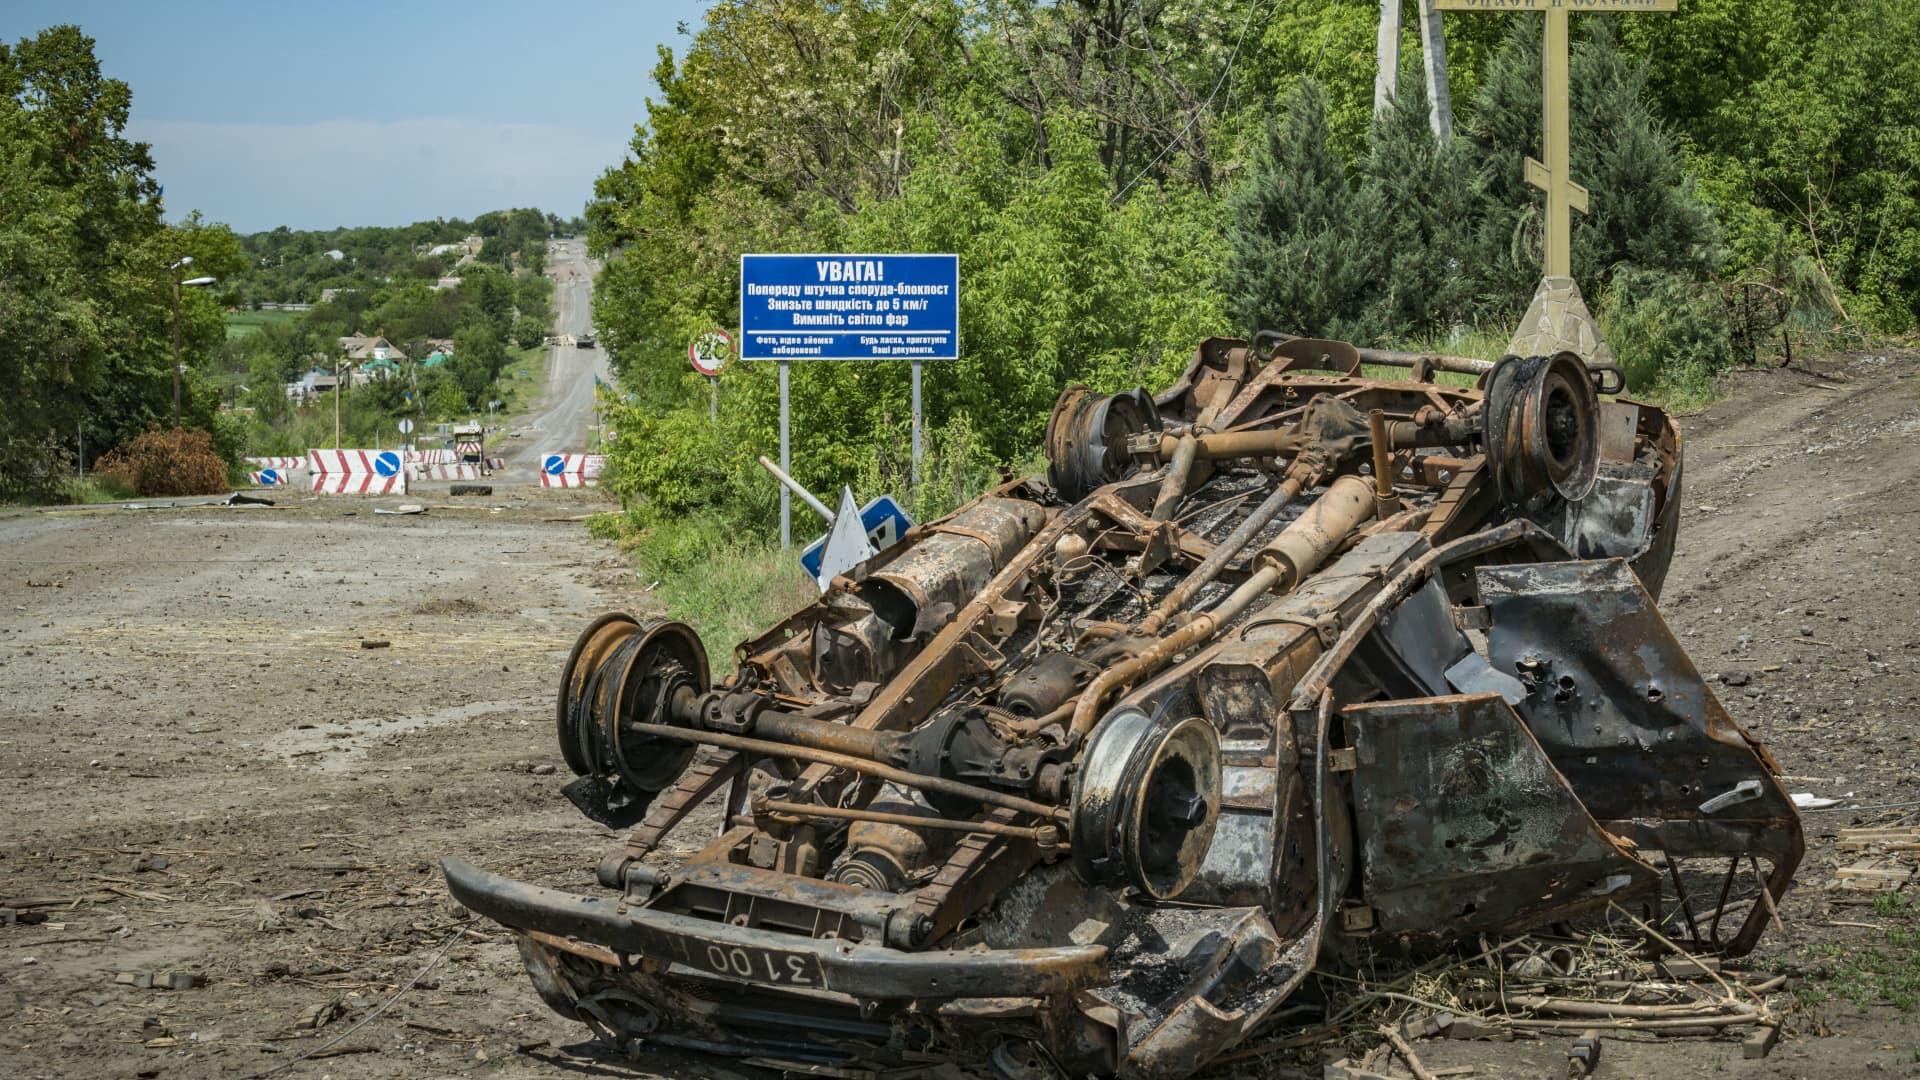 A car destroyed by Russian shelling at the entrance of the village of Dolyna in the Donbas. Dolyna is near the front line between Russian and Ukrainian armies.